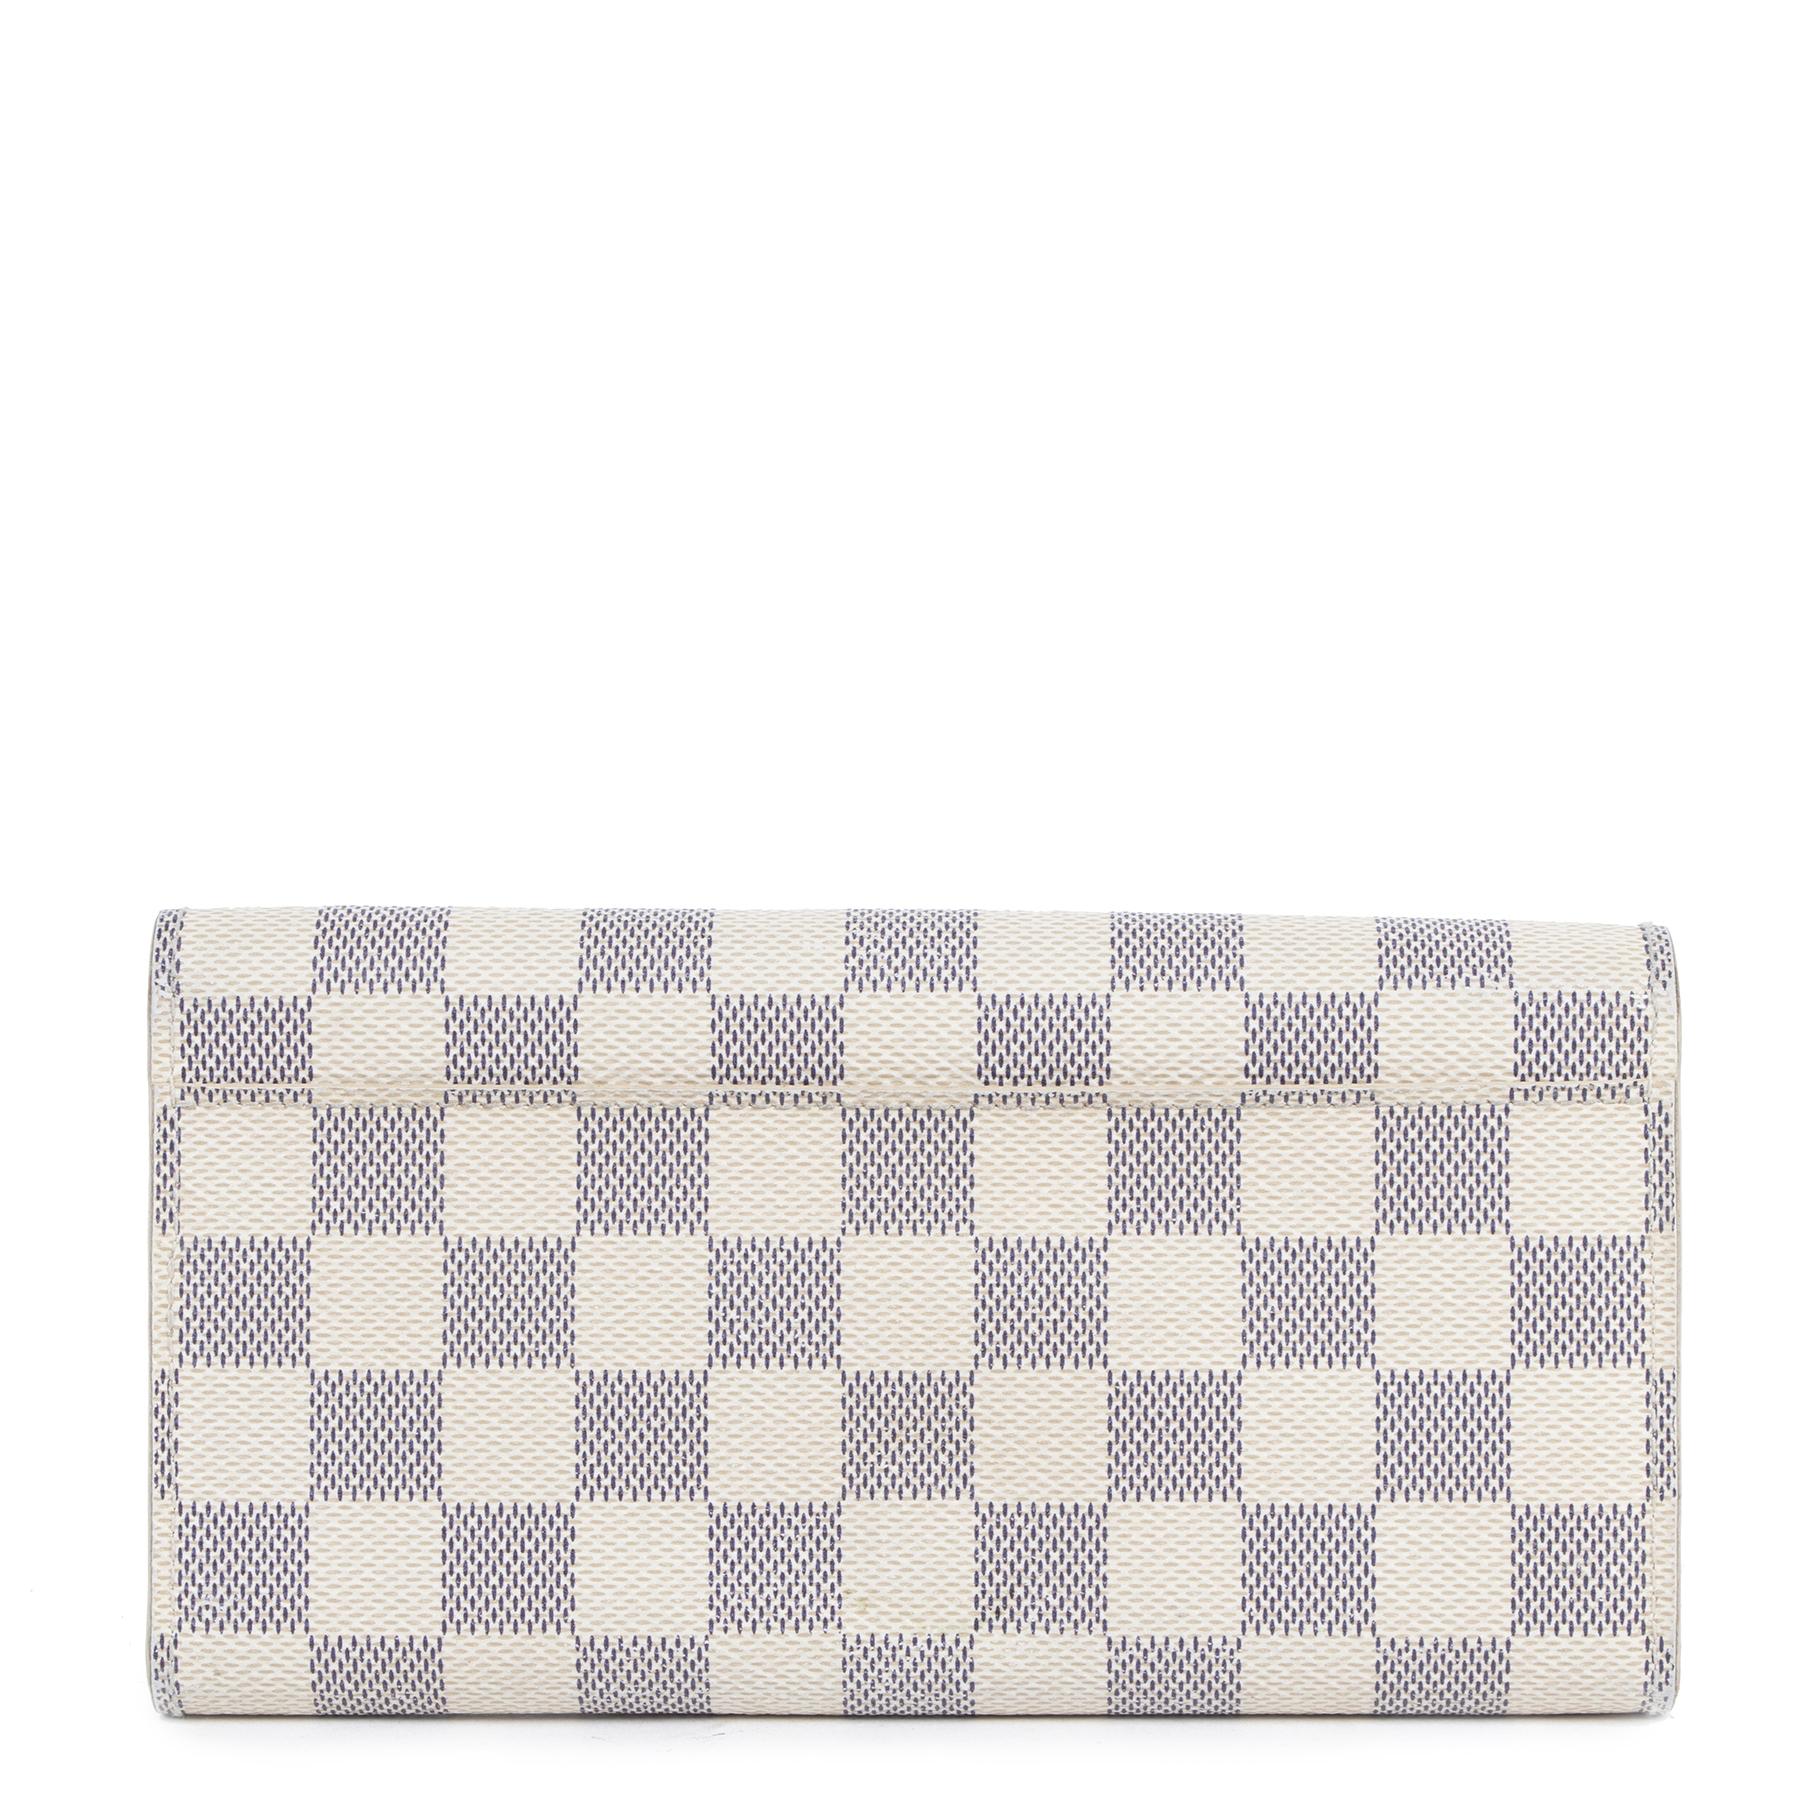 Very good condition

Louis Vuitton Sarah Damier Azur Wallet

Keep your most important items organised with this stylish Sarah wallet by Louis Vuitton. This long wallet is made from Damier canvas and features cowhide leather lining. The wallet opens